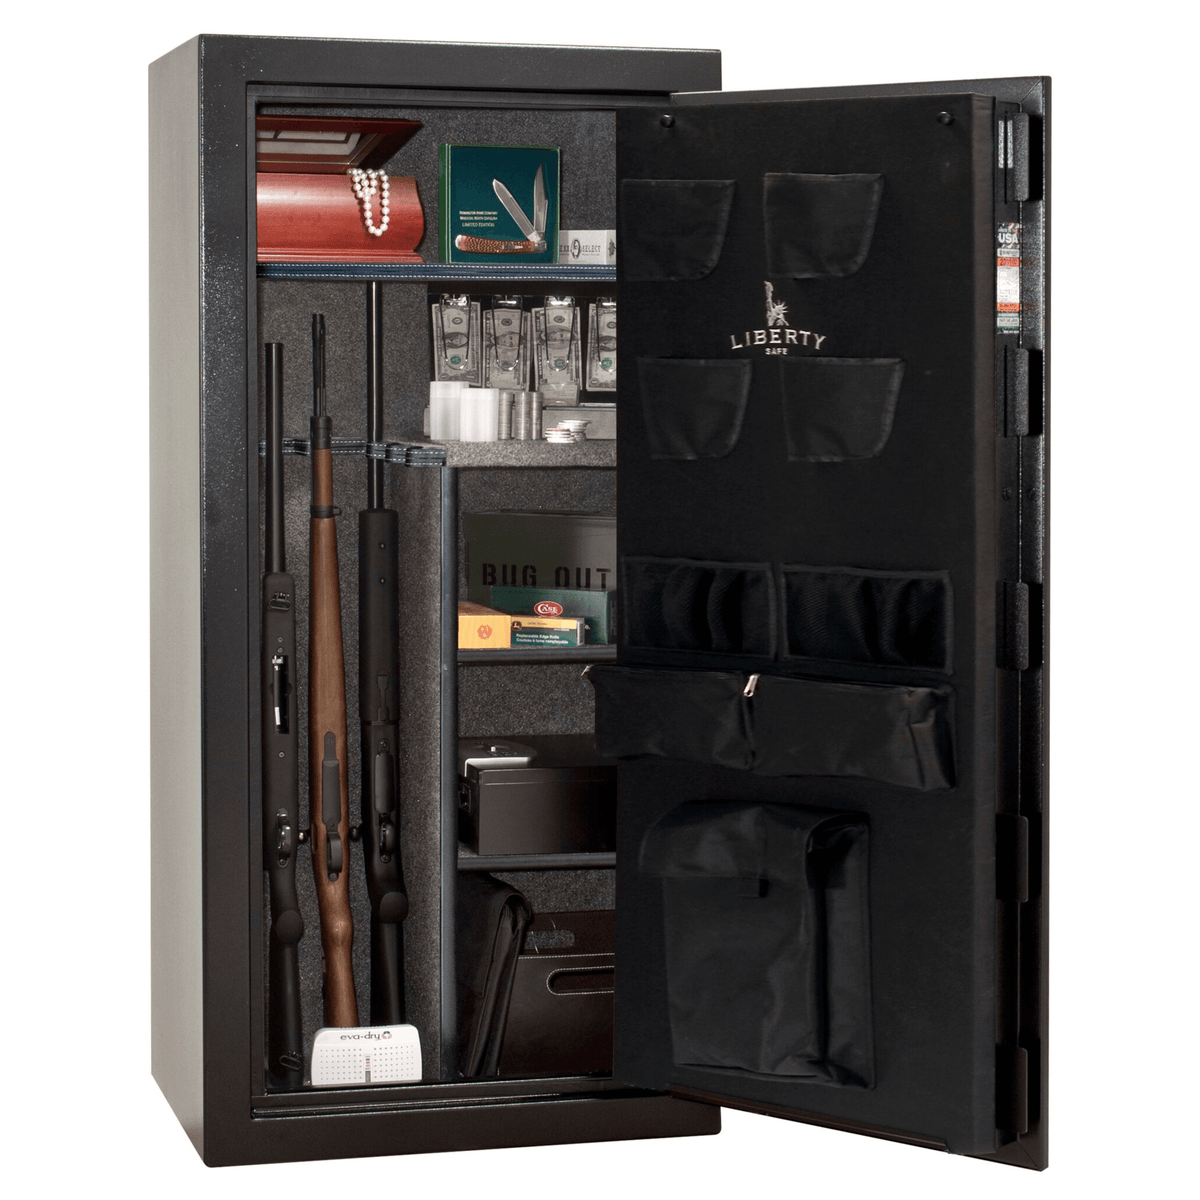 Open CENTURION 24 Safe in Textured Black with Chrome Electronic Lock, open.